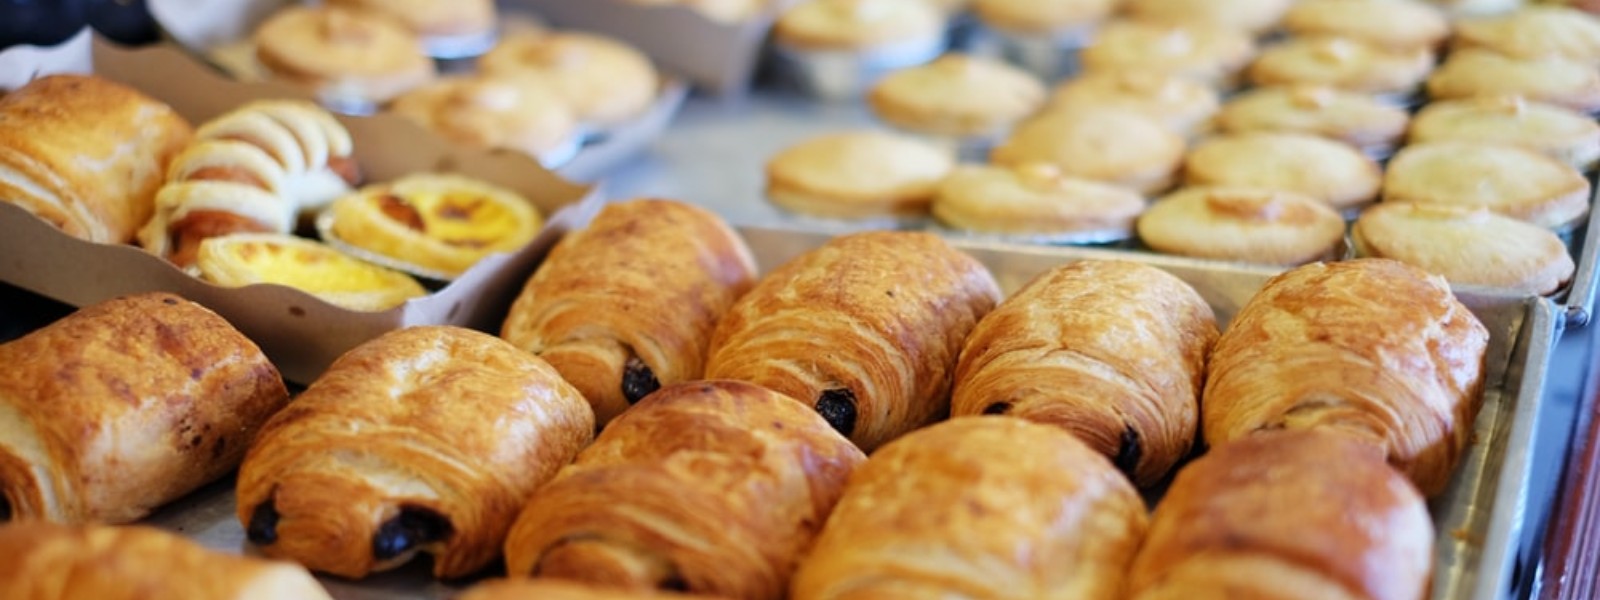 NO price controls for bakery products from midnight